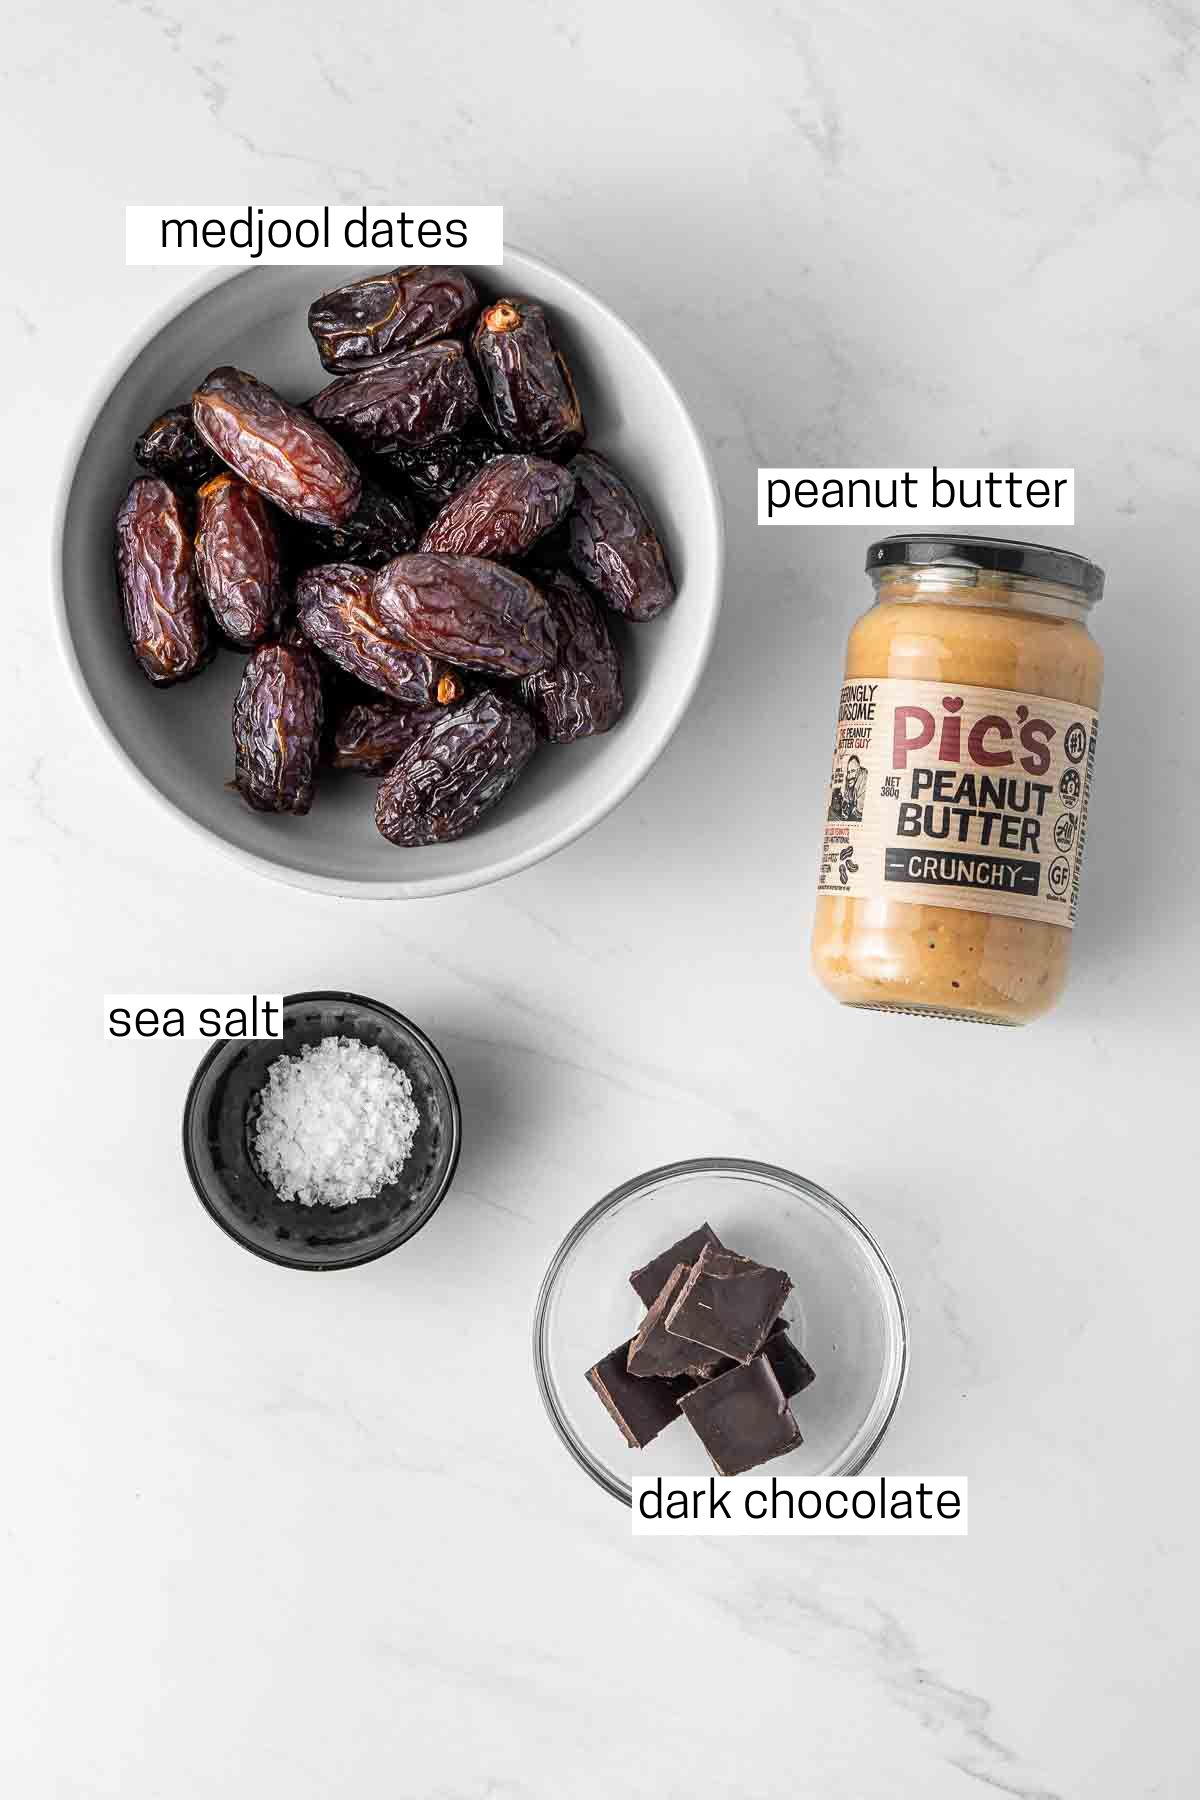 All ingredients needed to make peanut butter dates laid out in bowls.